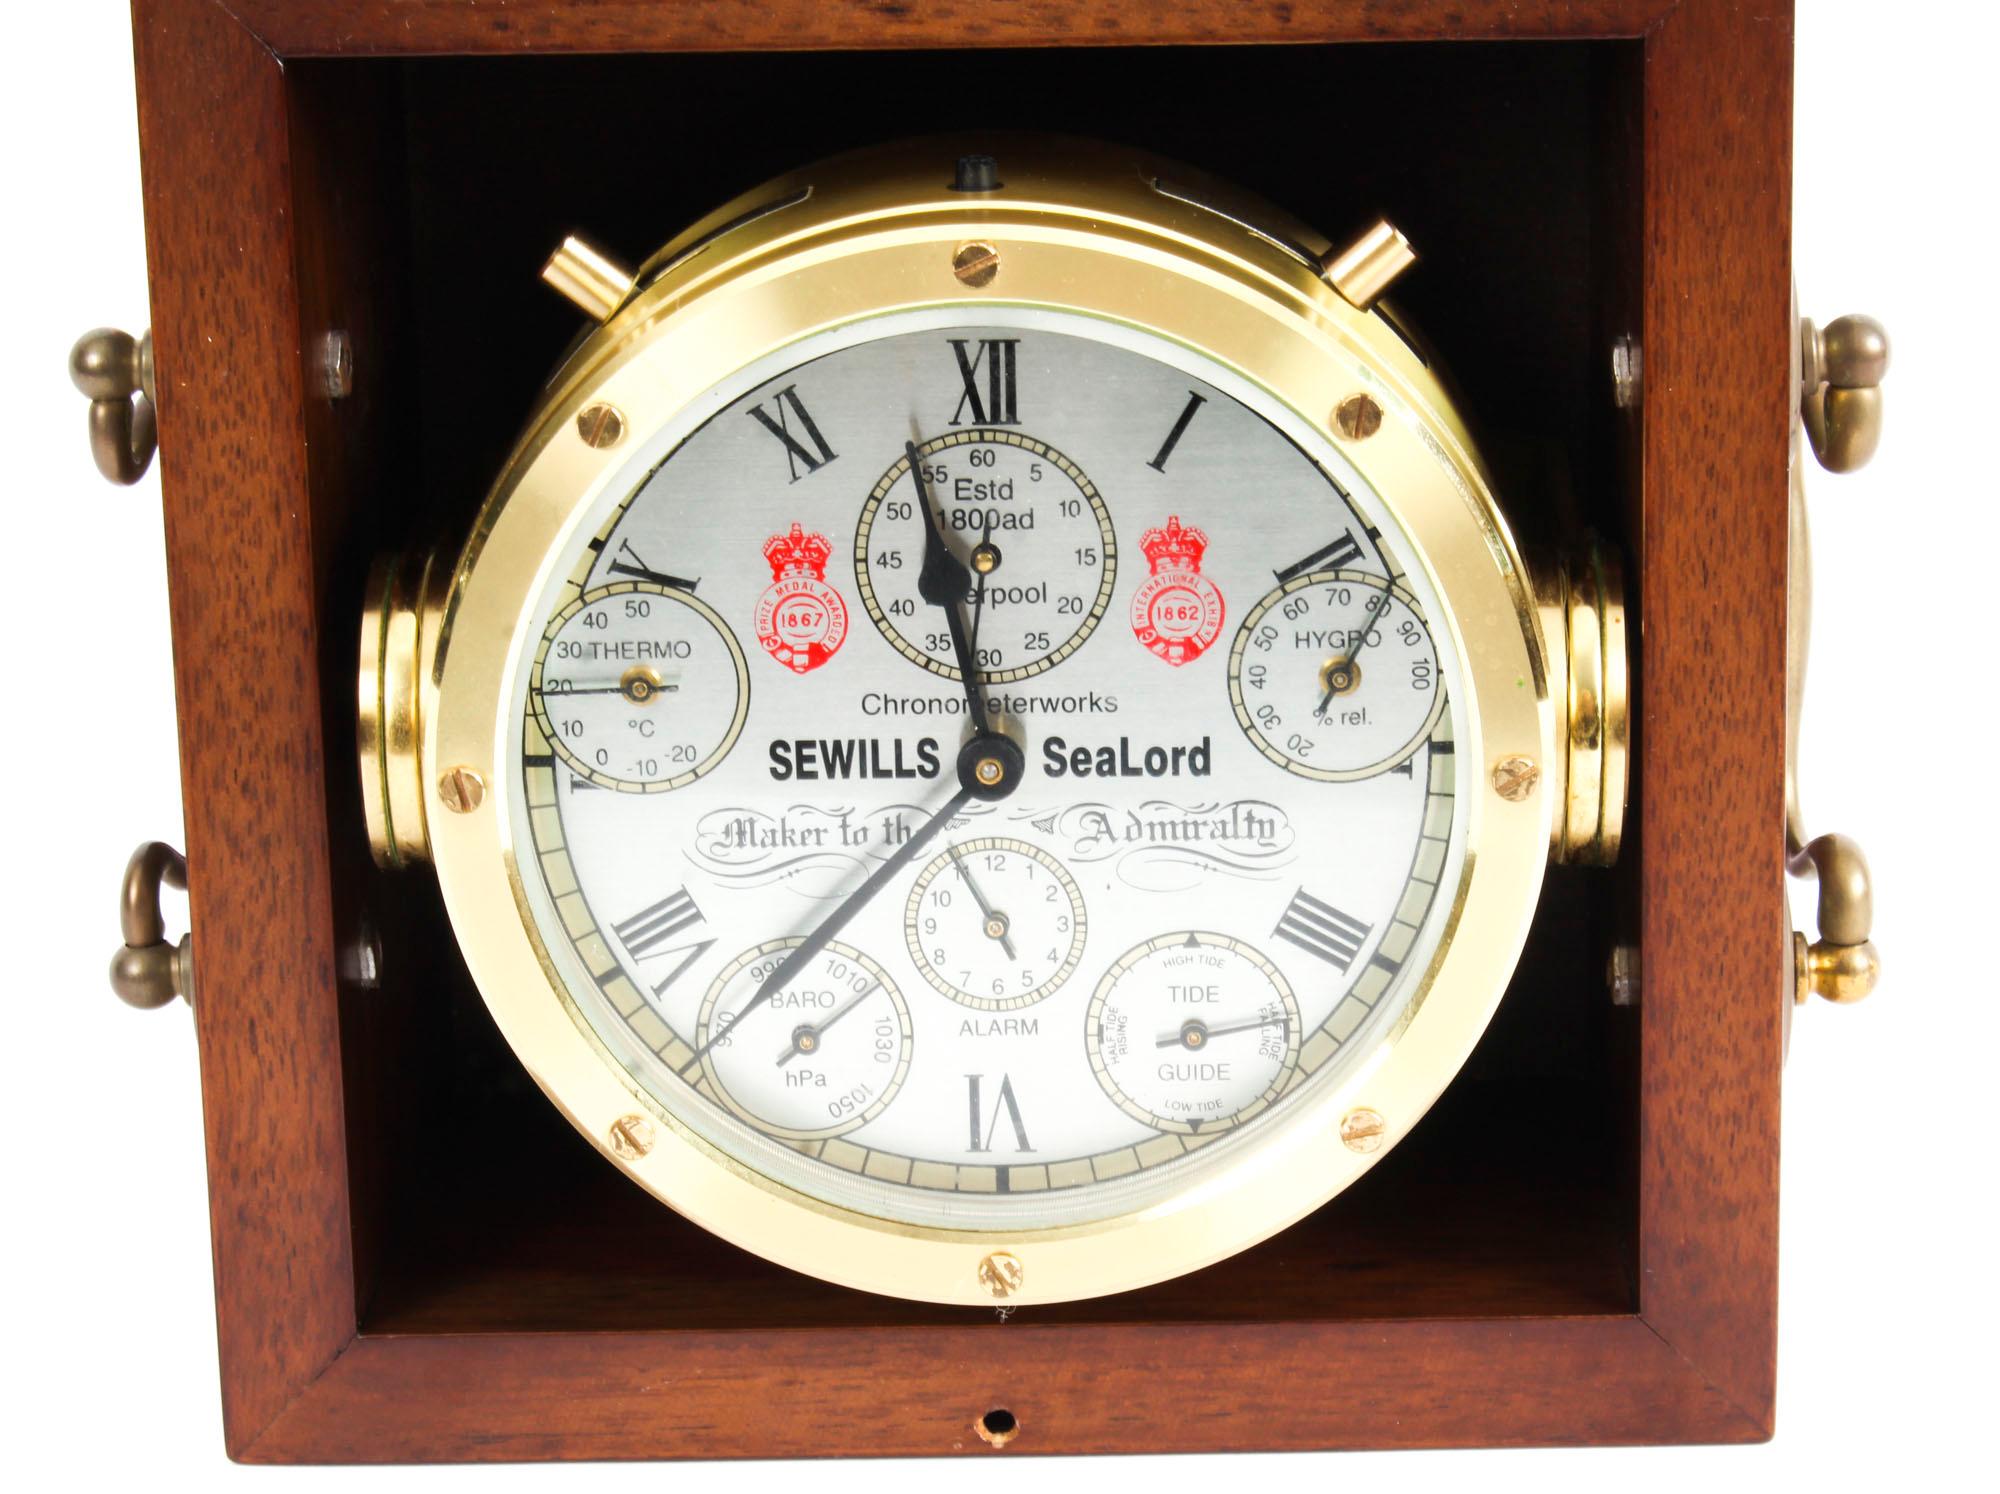 This is a stunning and decorative mahogany cased 'Nelson' chronometer compendium by the renowned chronometer, watch, clock and weather instrument makers to the Admiralty, Sewills of Liverpool, dating from the second half of the 20th century. 

The